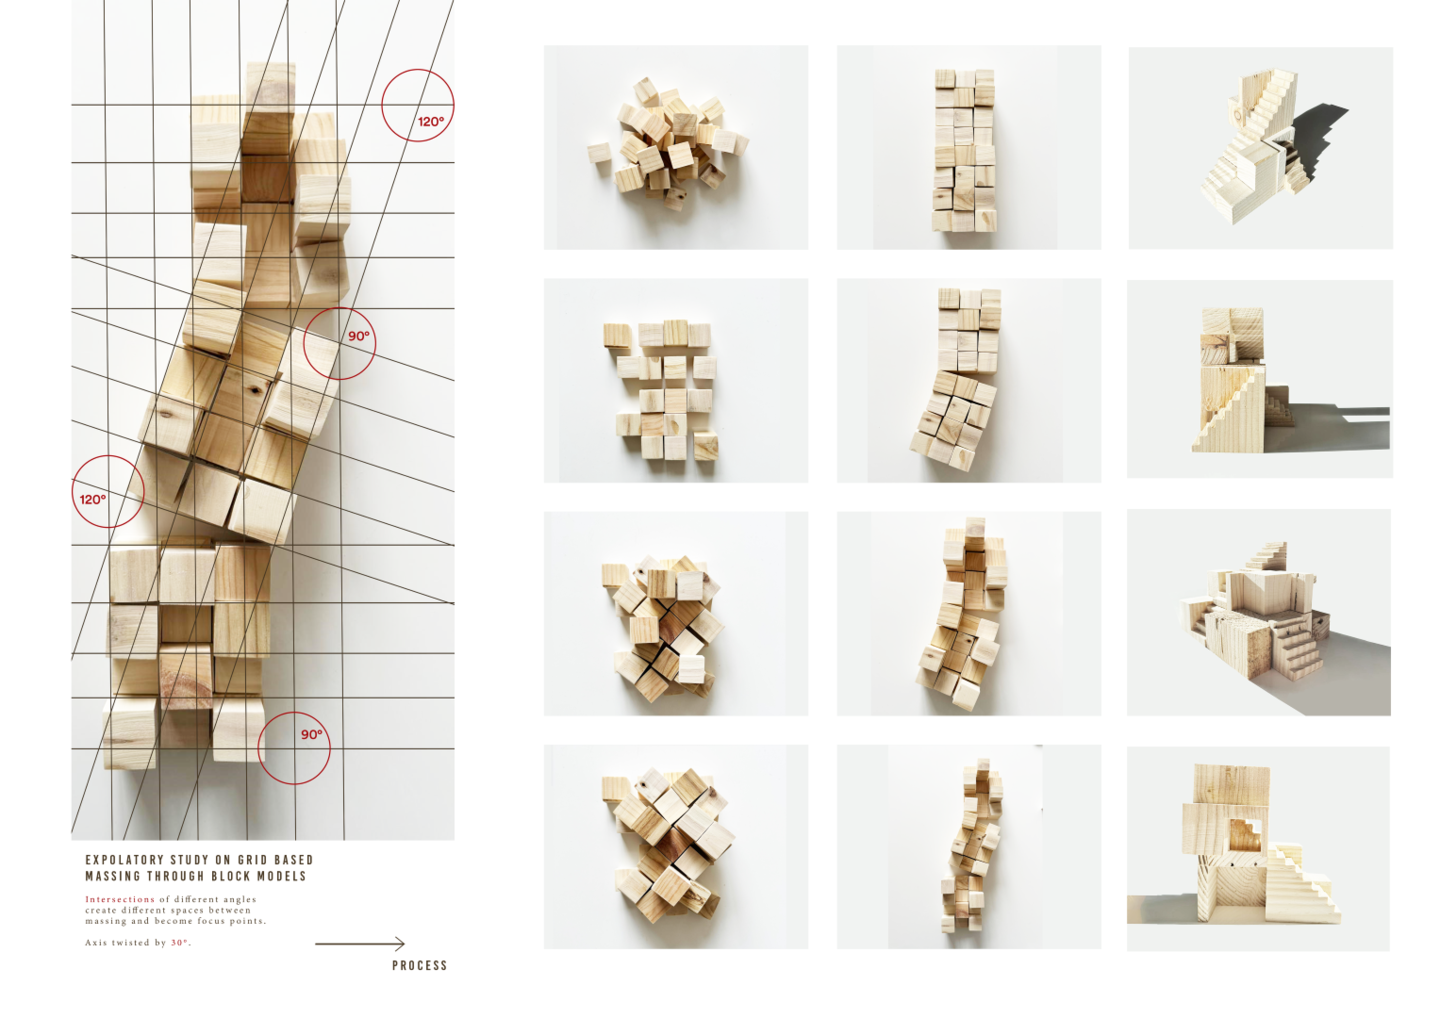 Wooden block models stacked to explore form iterations